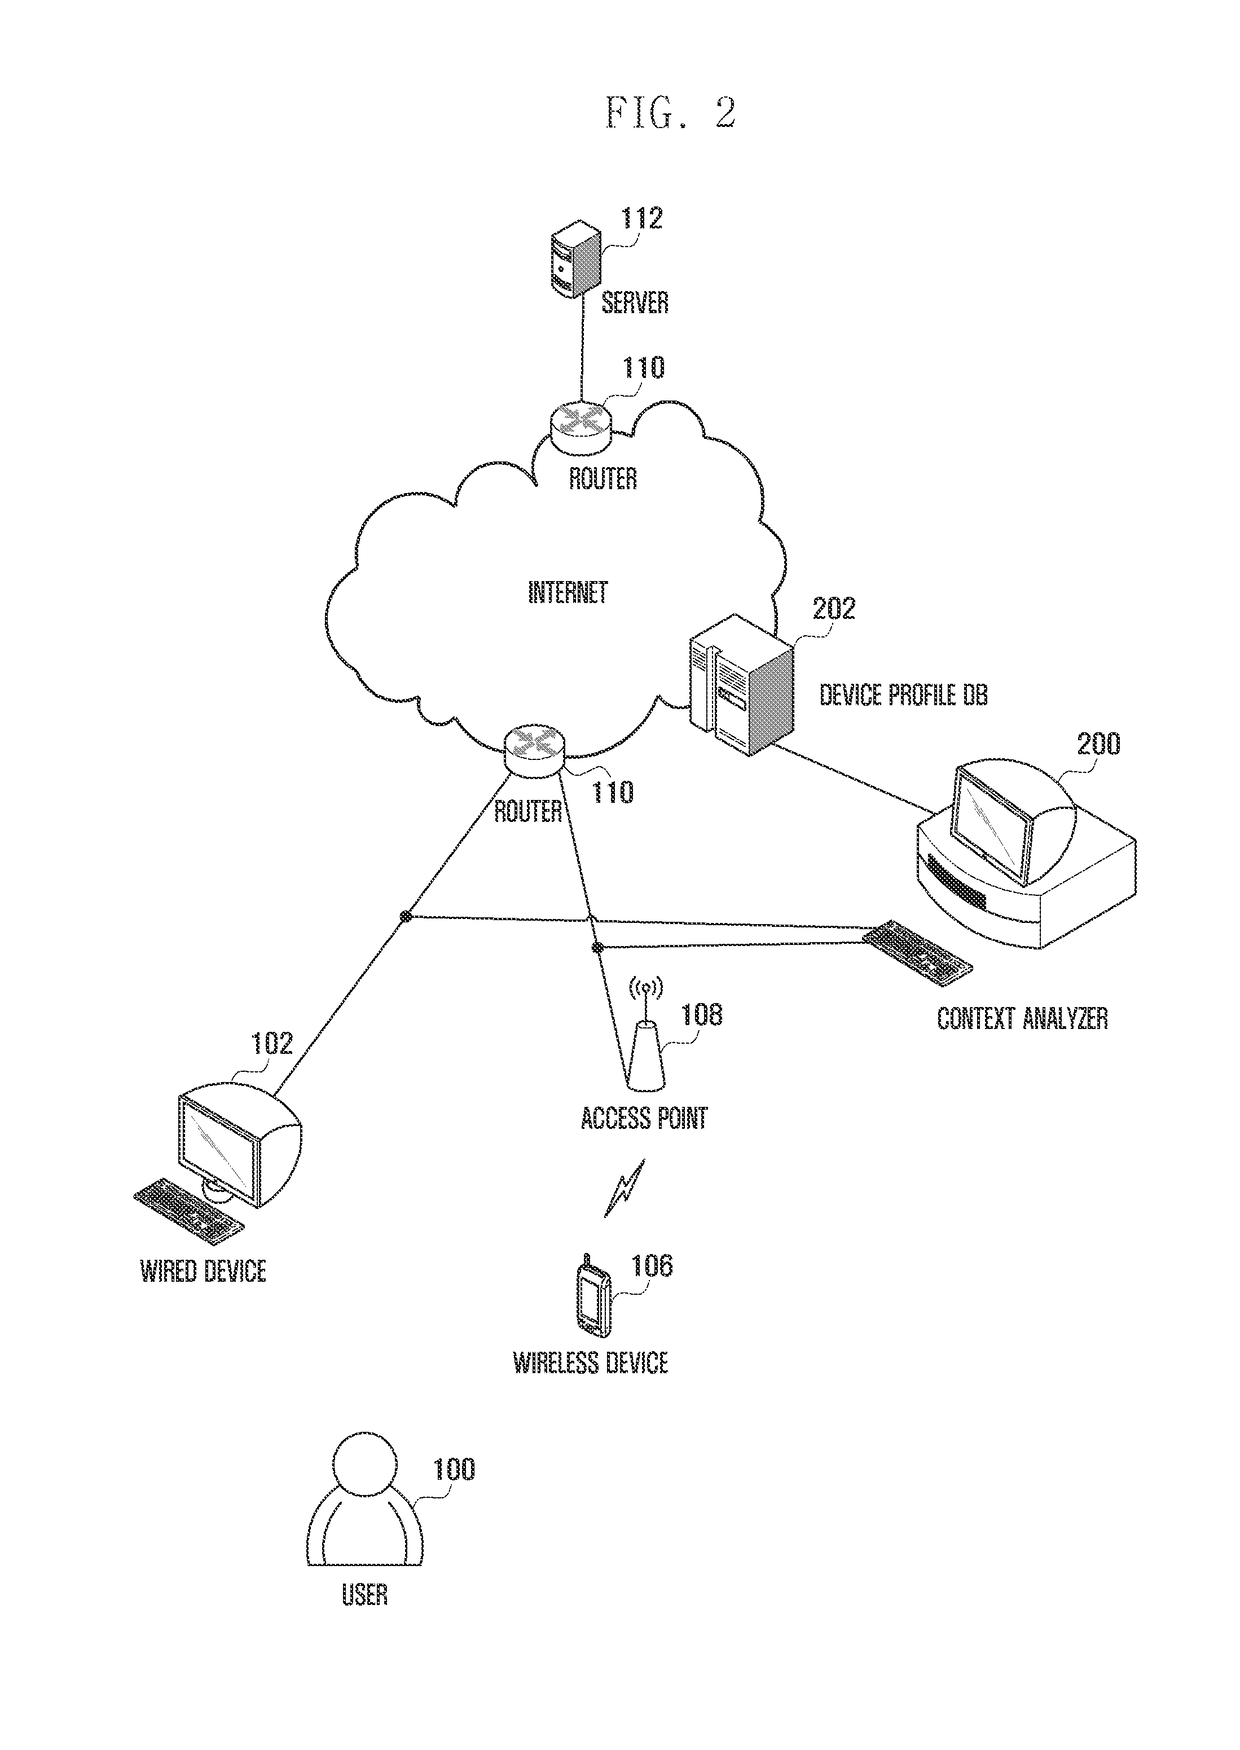 Method and apparatus for managing device context using an IP address in a communication system